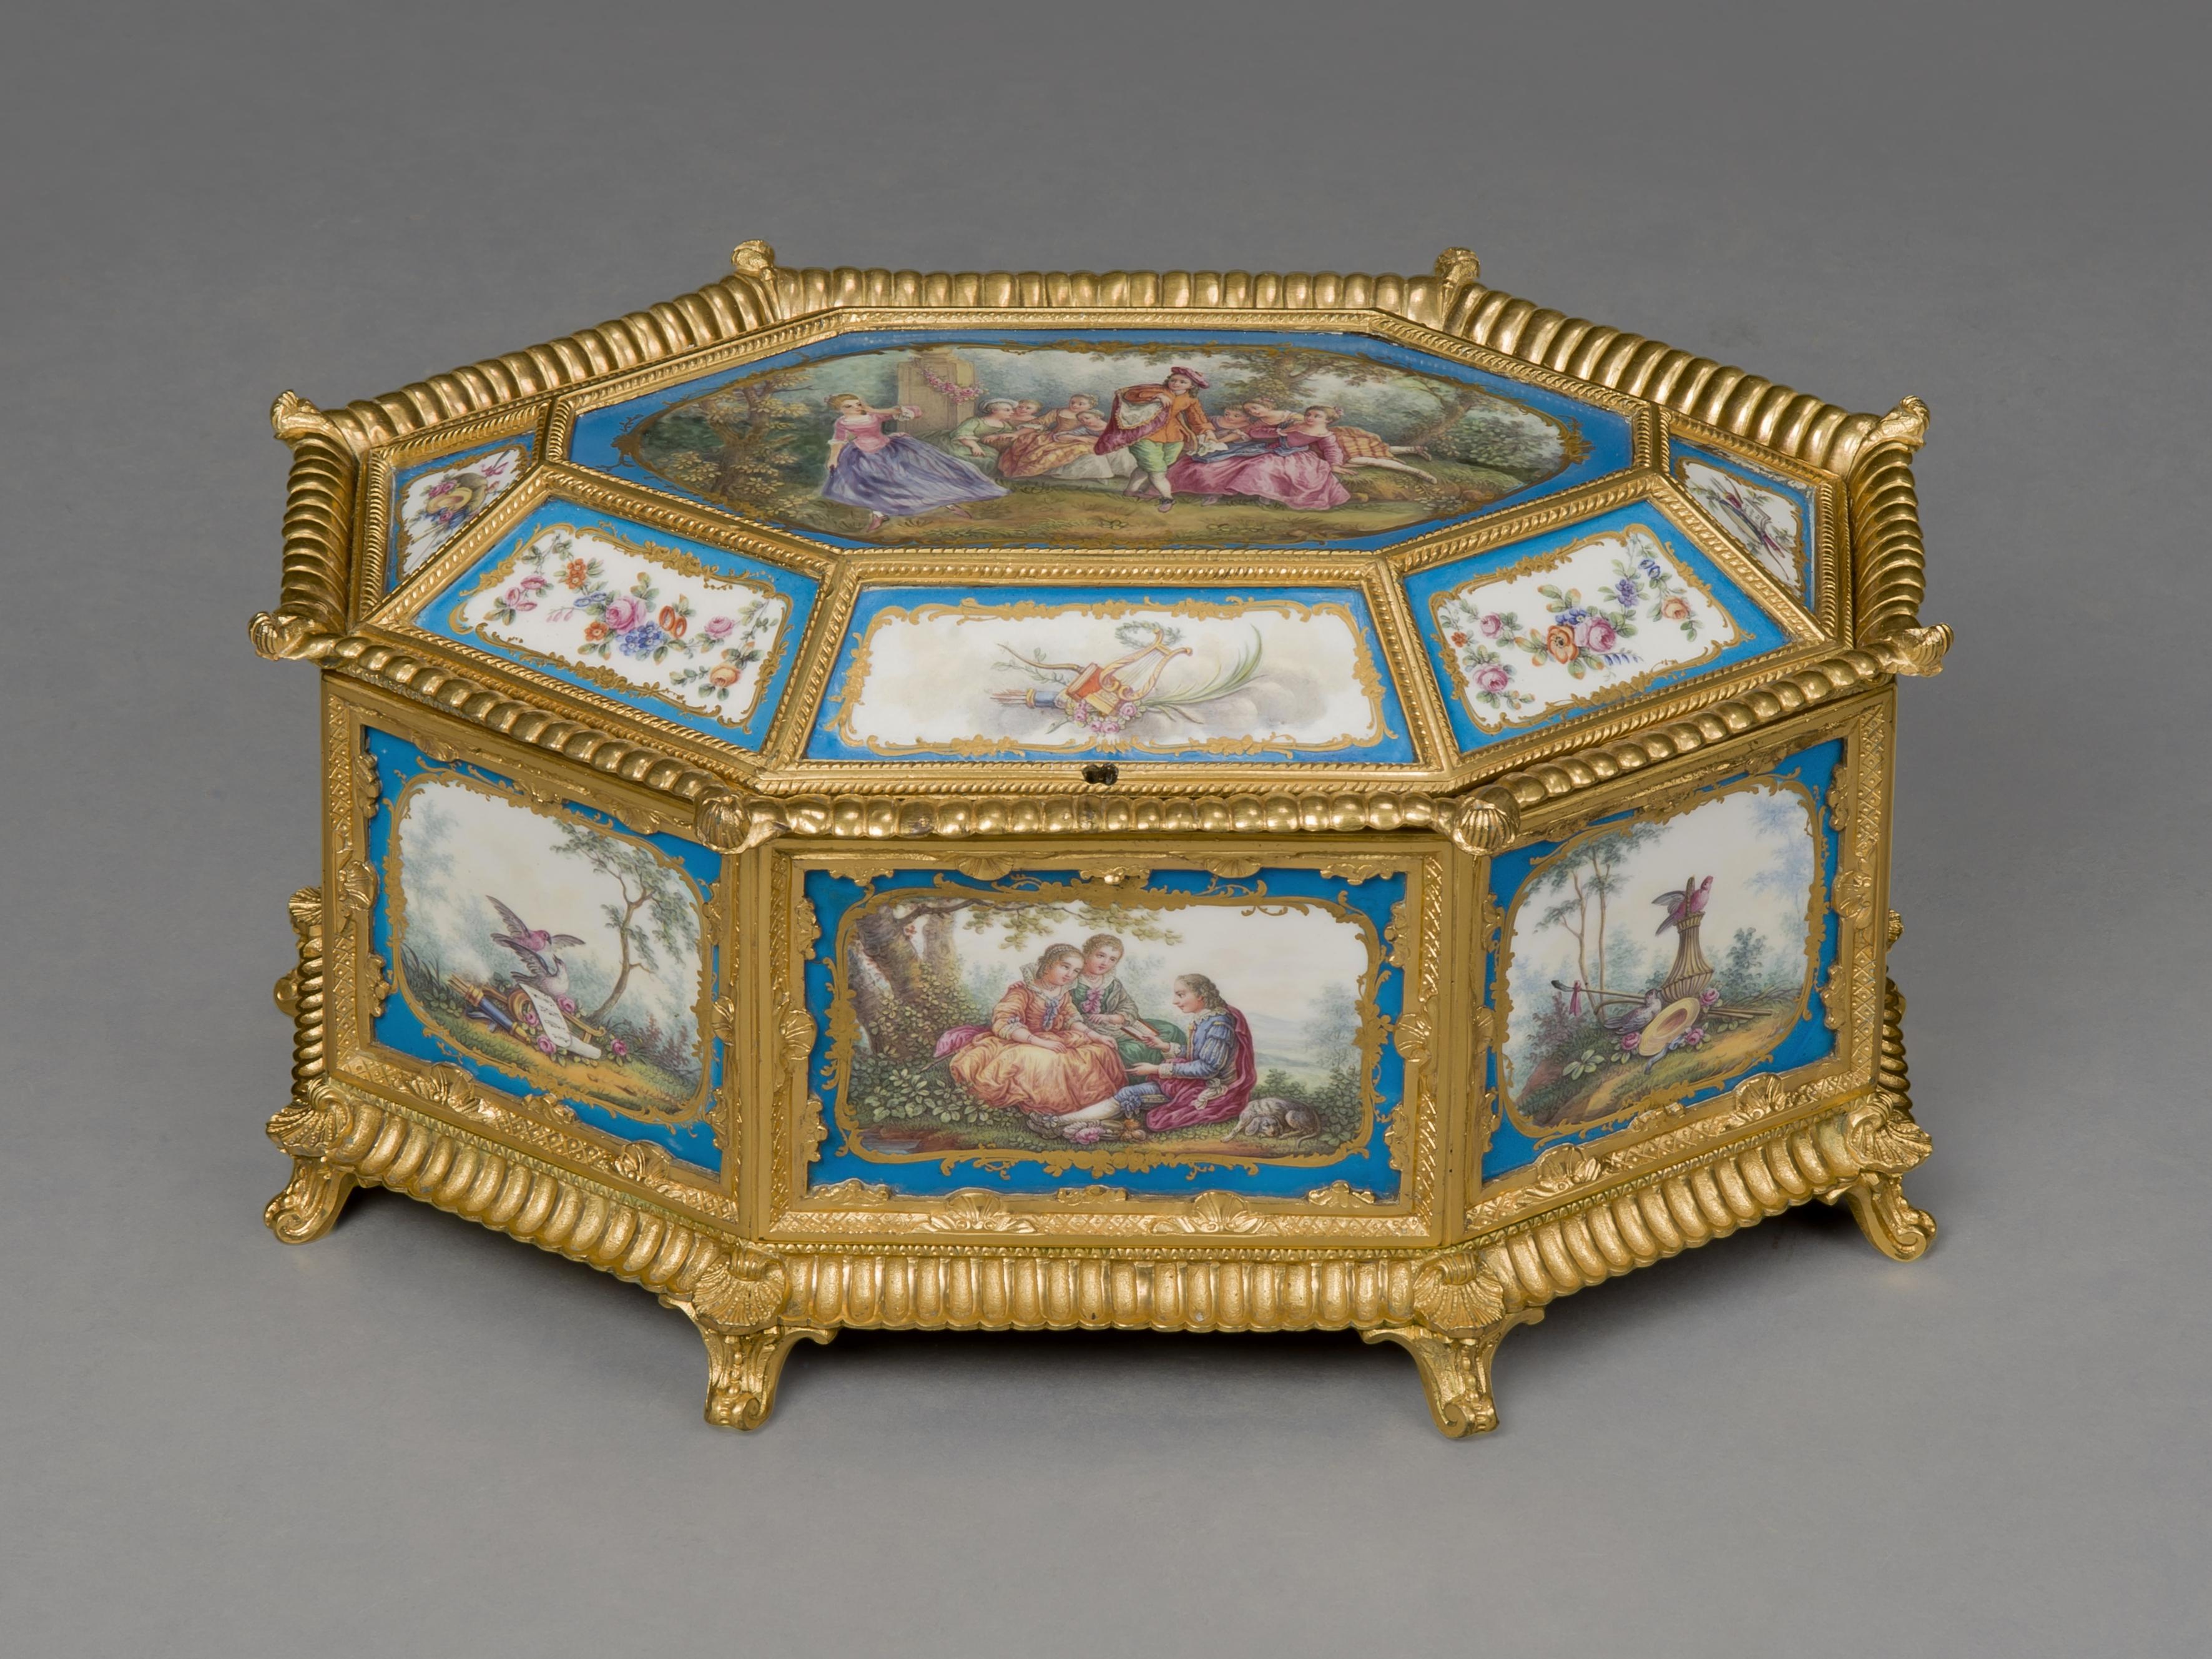 A fine Louis XVI style gilt bronze and Sèvres-style porcelain mounted octagonal table box.

French, circa 1890.

This fine porcelain and gilt bronze-mounted box has an octagonal hinged lid centering a Sèvres-style plaque depicting a scene from